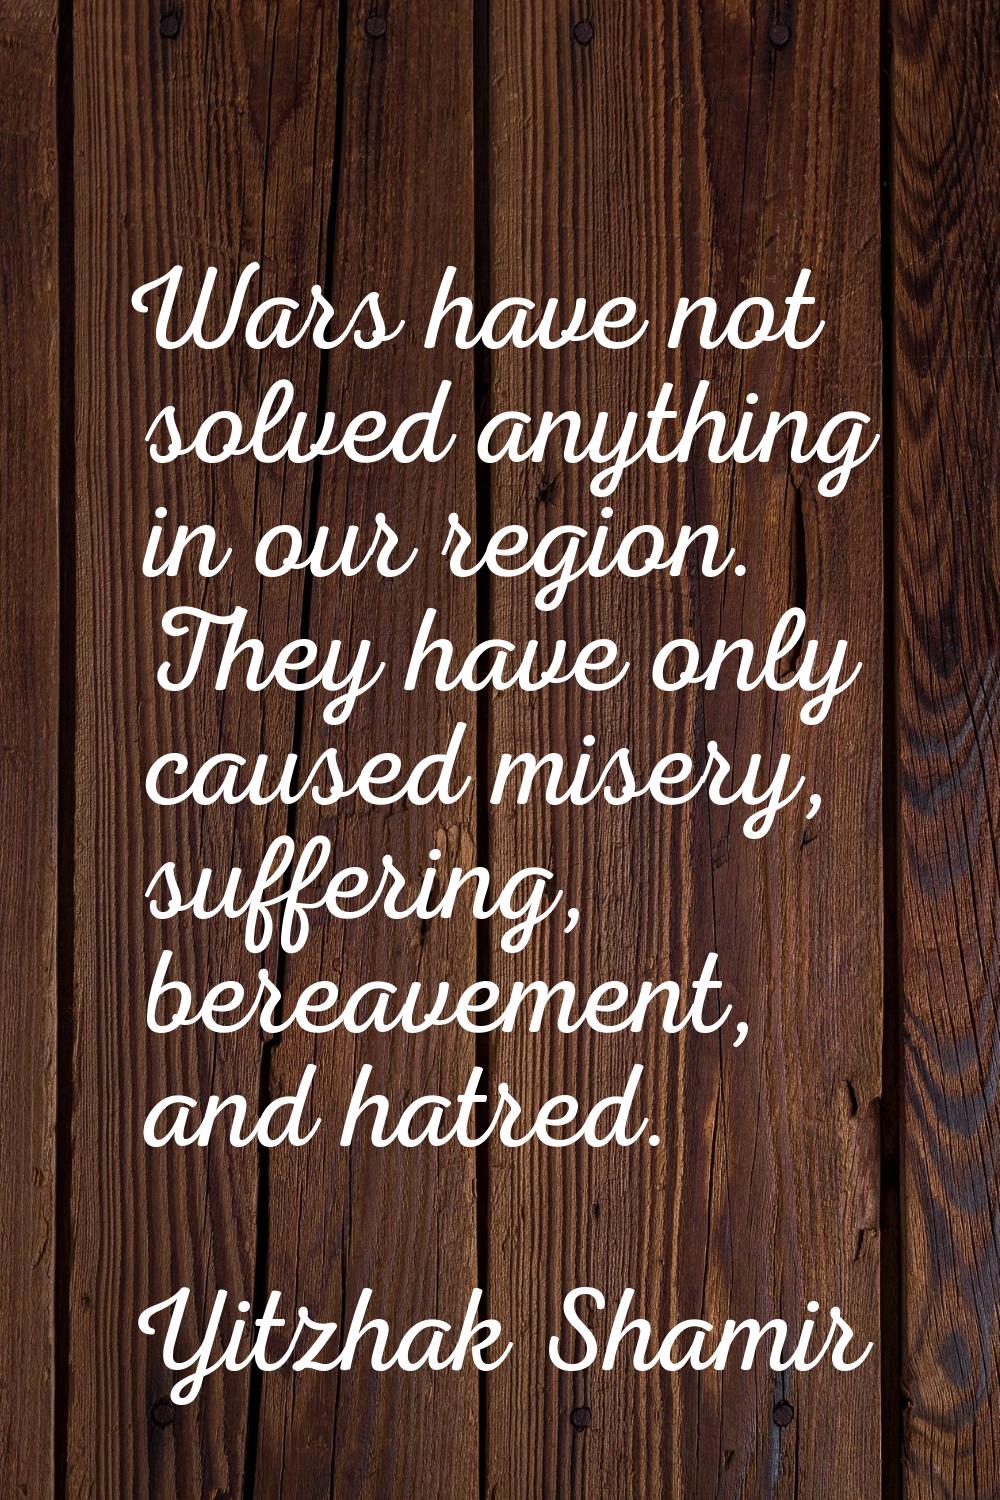 Wars have not solved anything in our region. They have only caused misery, suffering, bereavement, 